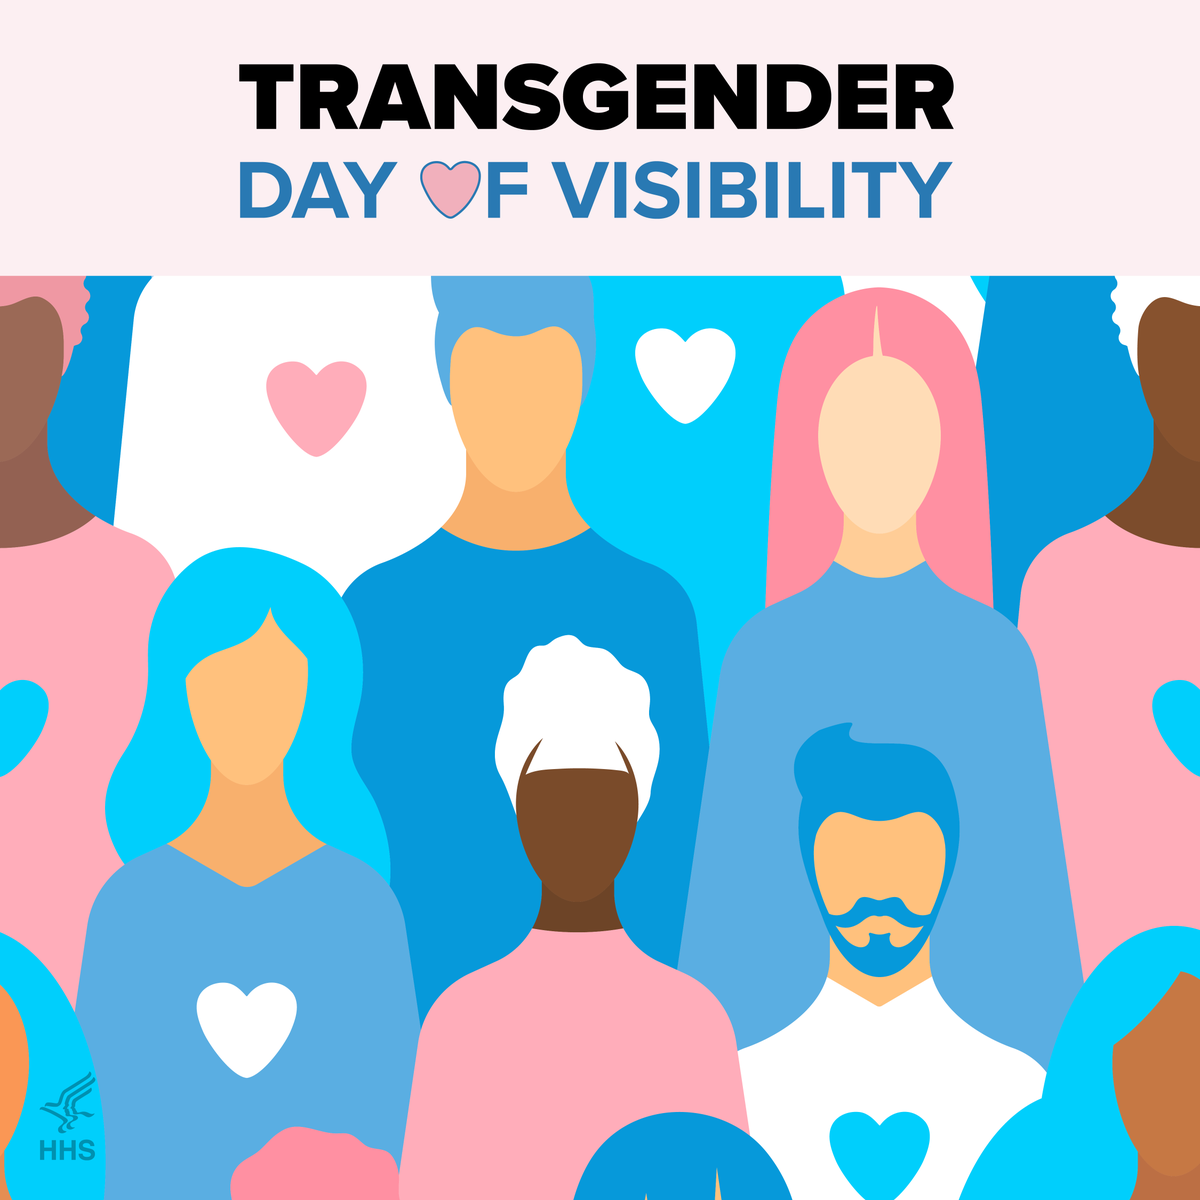 Today, I'm thinking about our country’s great transgender, nonbinary, and two-spirit leaders who epitomize resilience, progress, and joy. Transgender Day of Visibility is an opportunity to celebrate their accomplishments and double down on our commitment to their wellbeing.